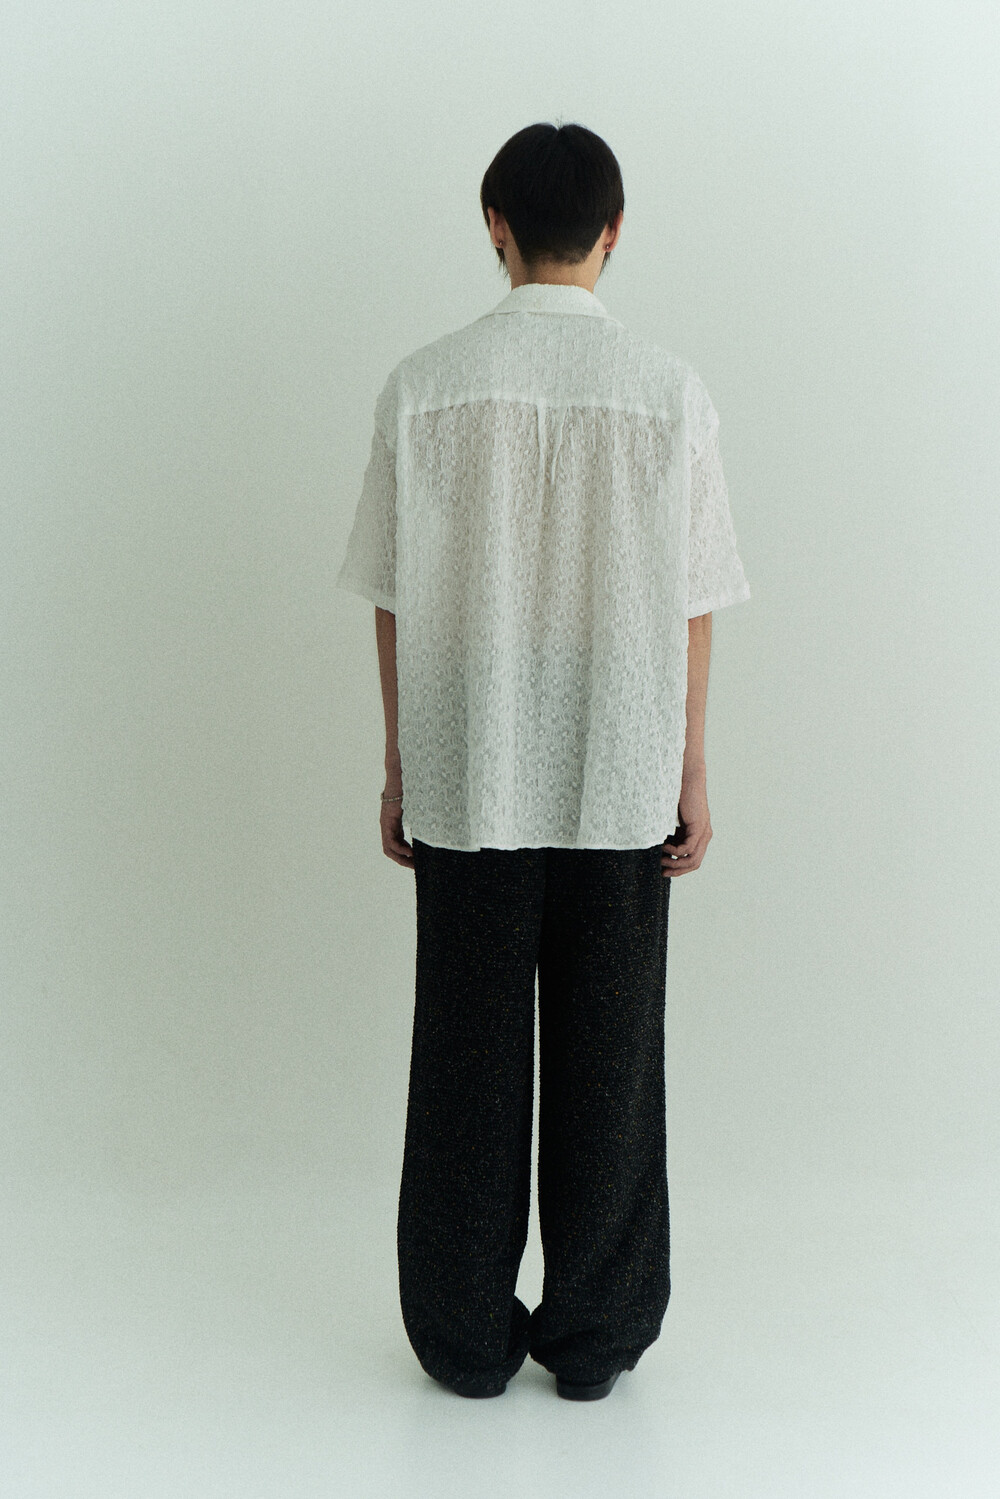 LACE SHIRT - Oyster-white